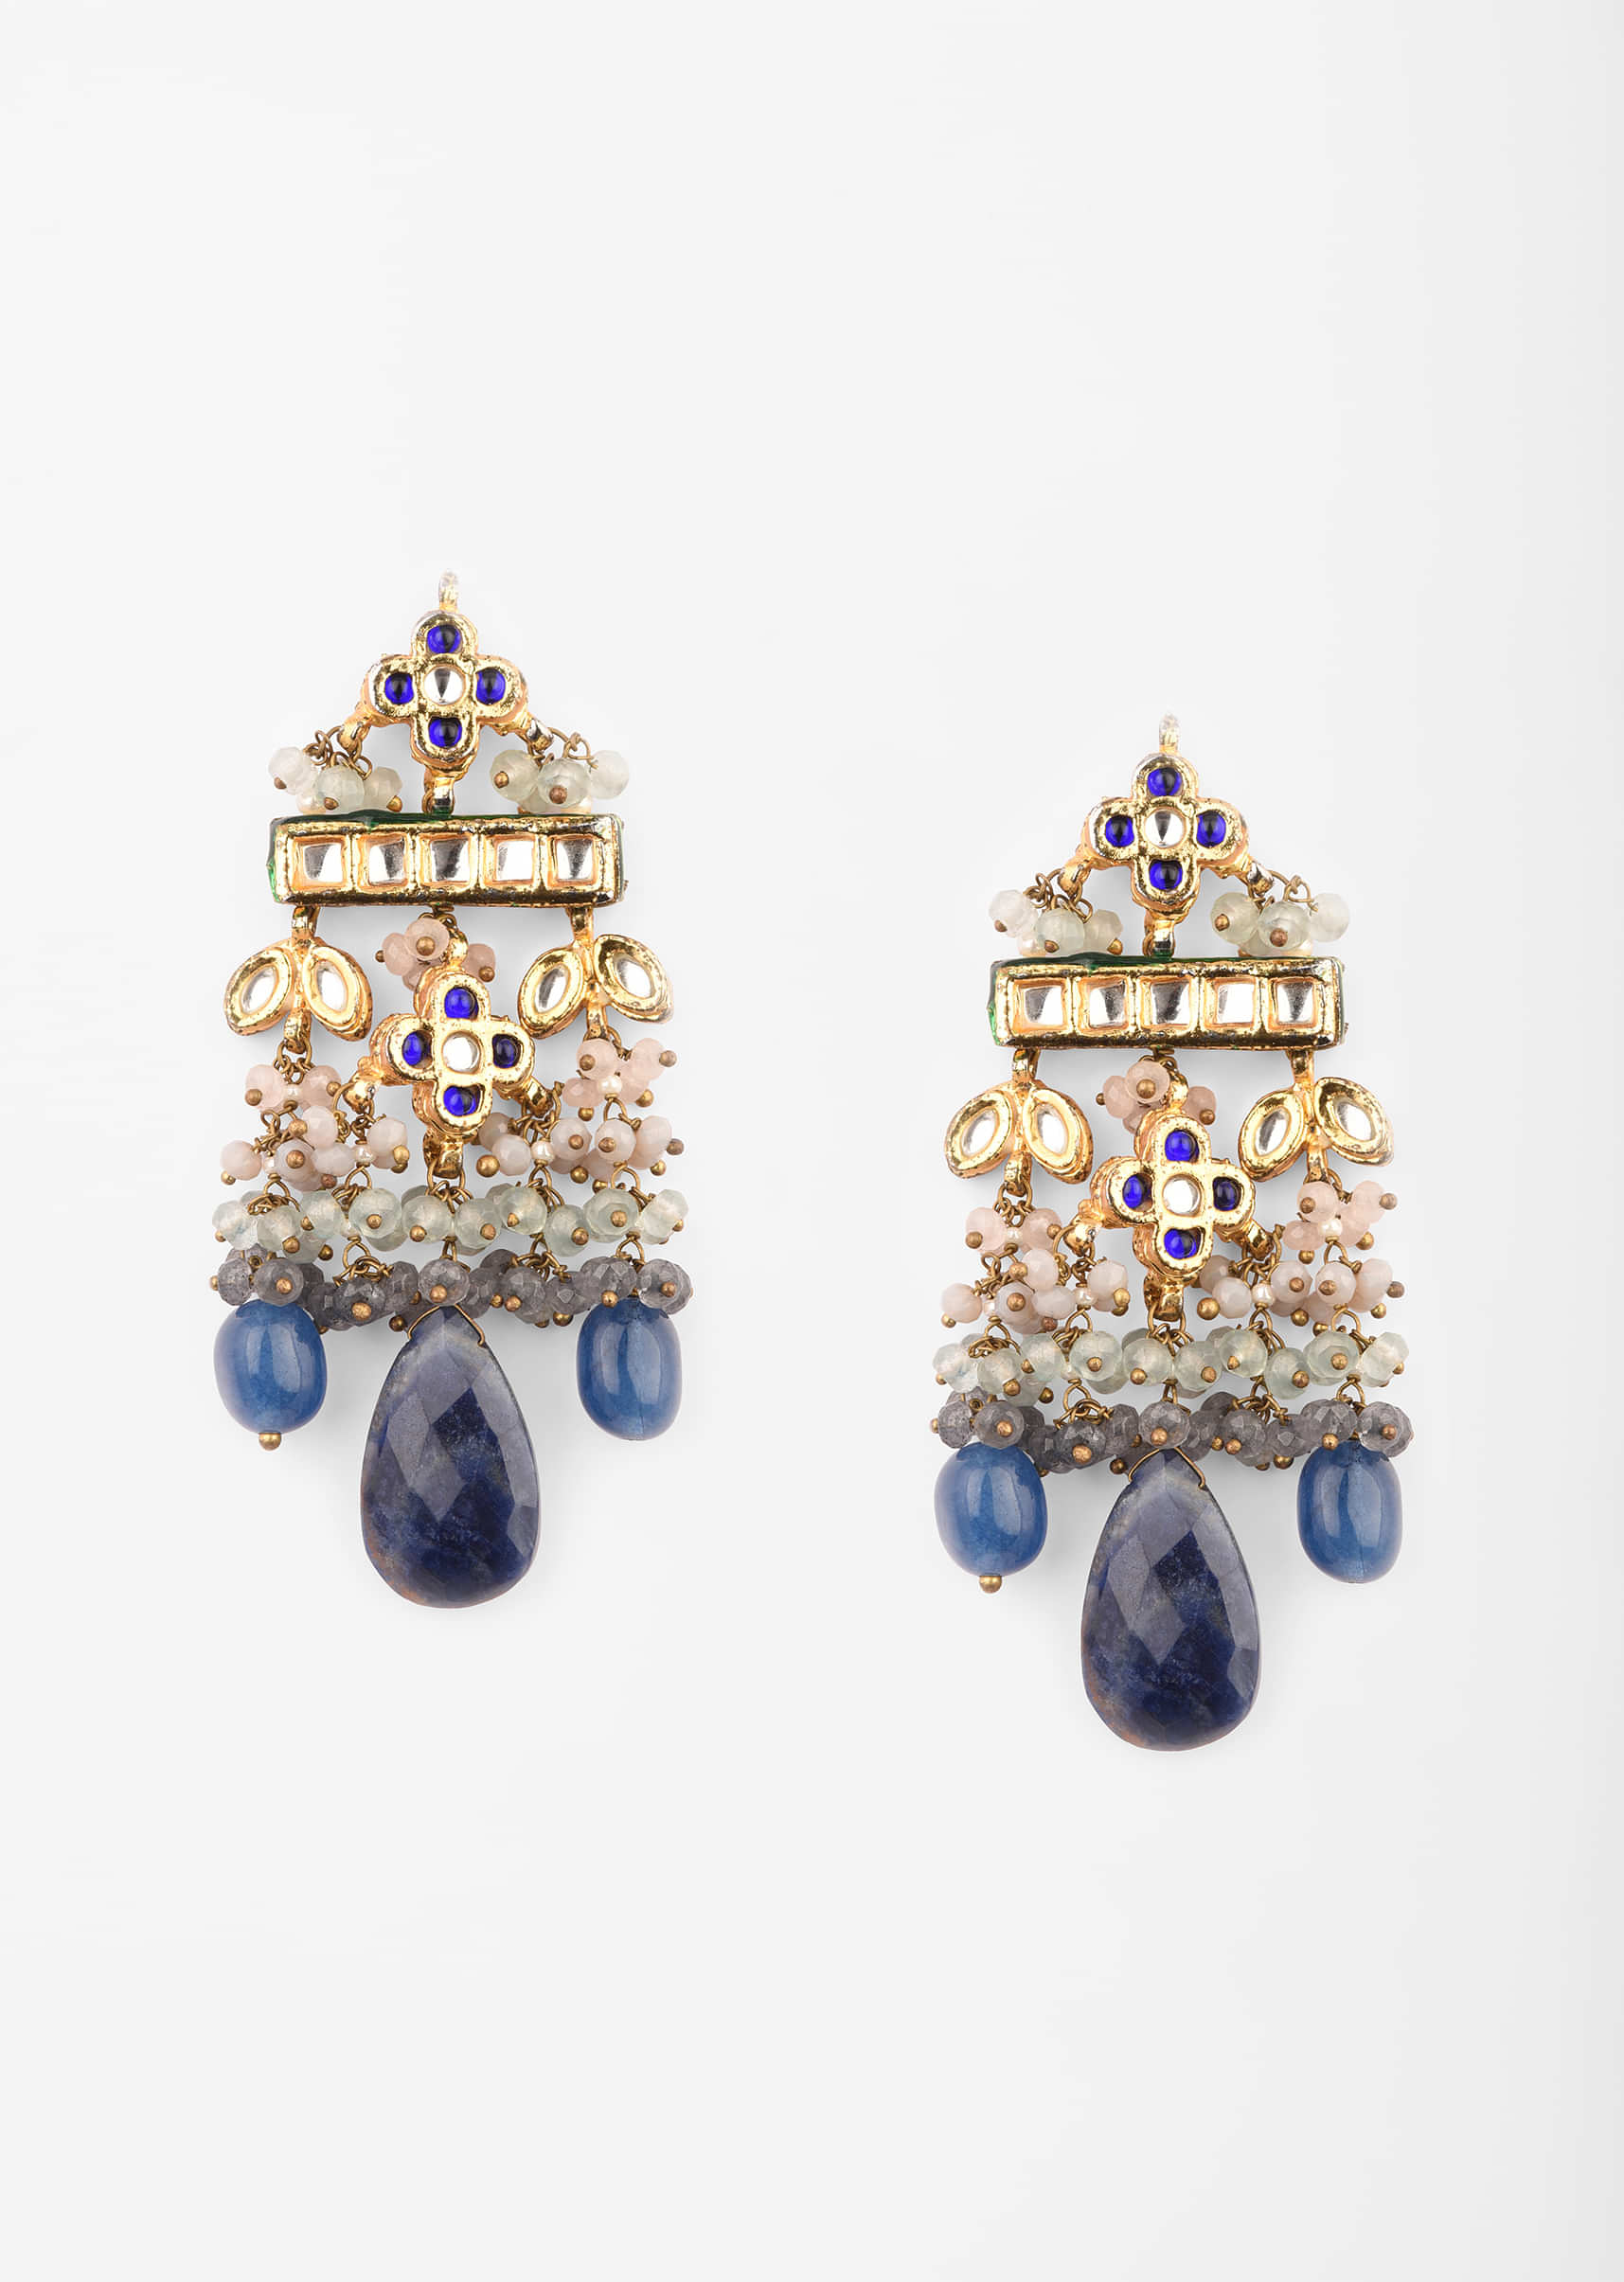 Gold Plated Earrings With Kundan And Dangling Navy Blue Drops And Shaded Blue Bead Fringes